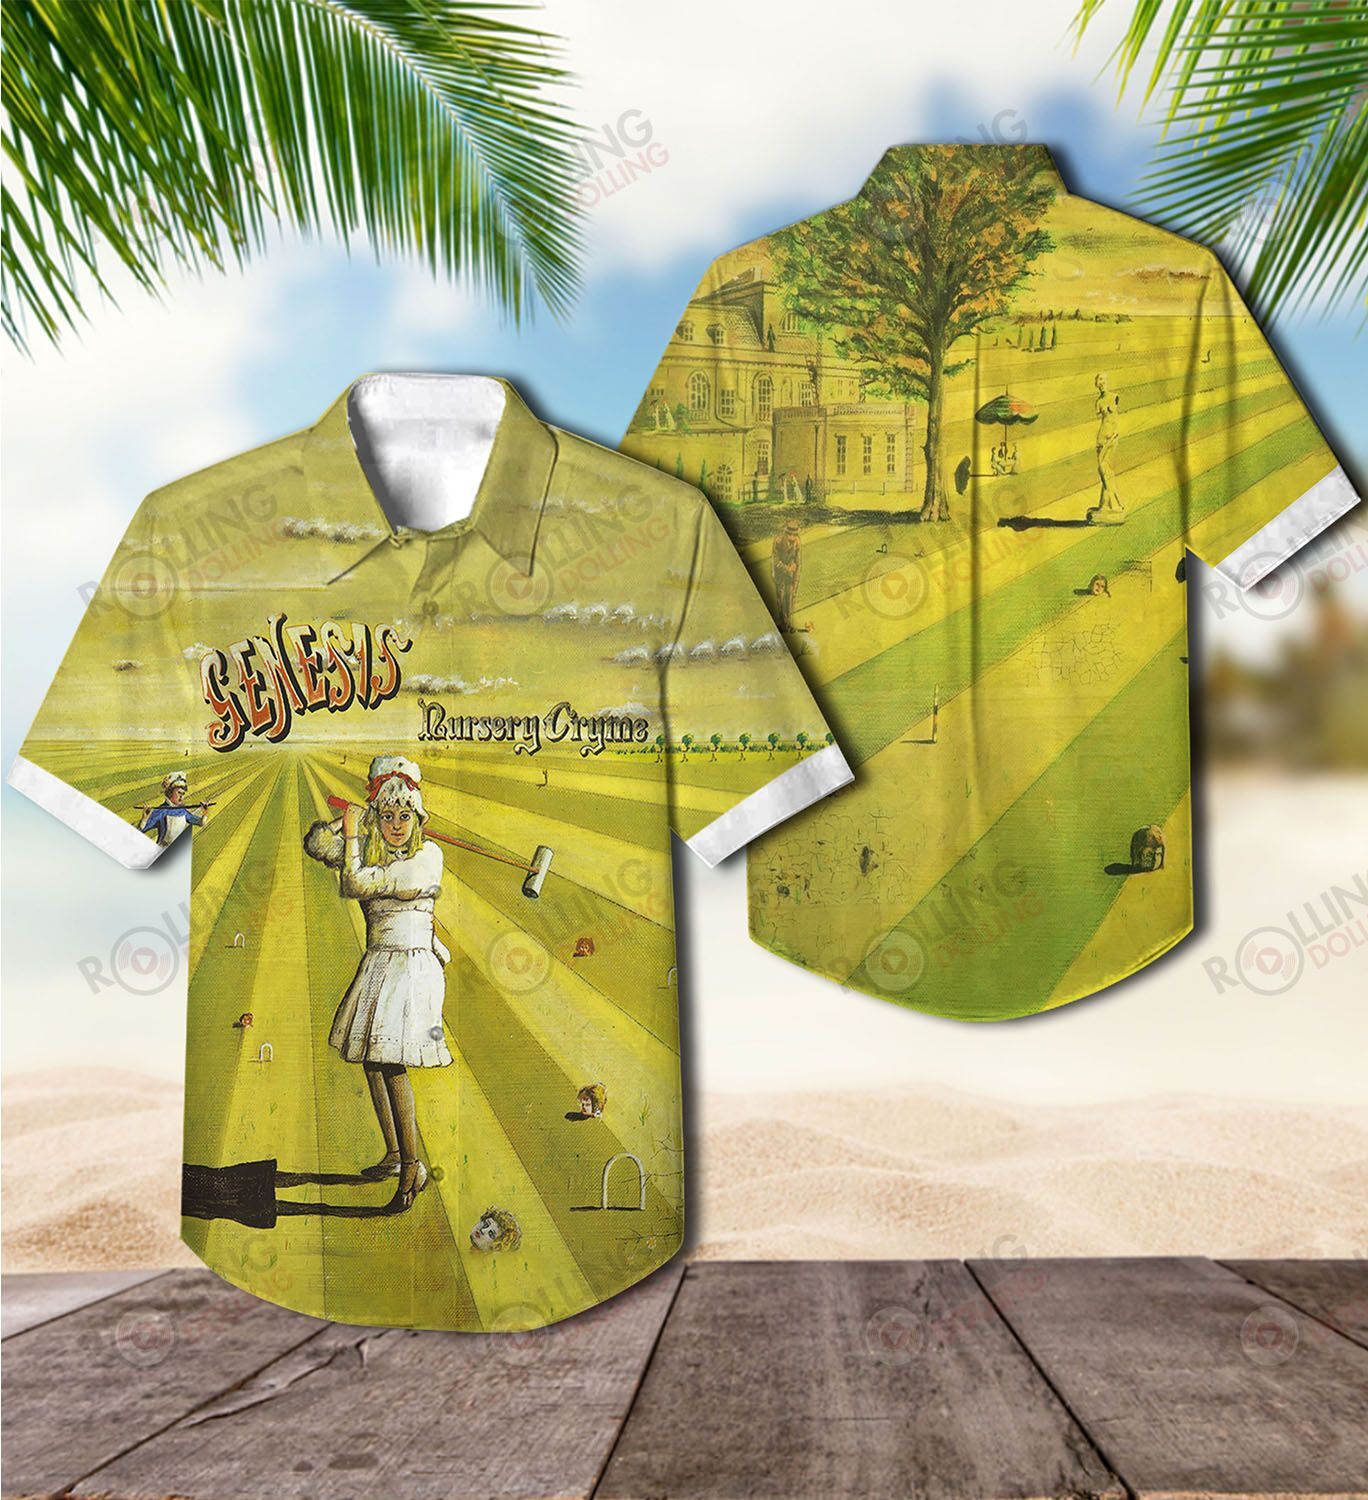 This would make a great gift for any fan who loves Hawaiian Shirt as well as Rock band 60